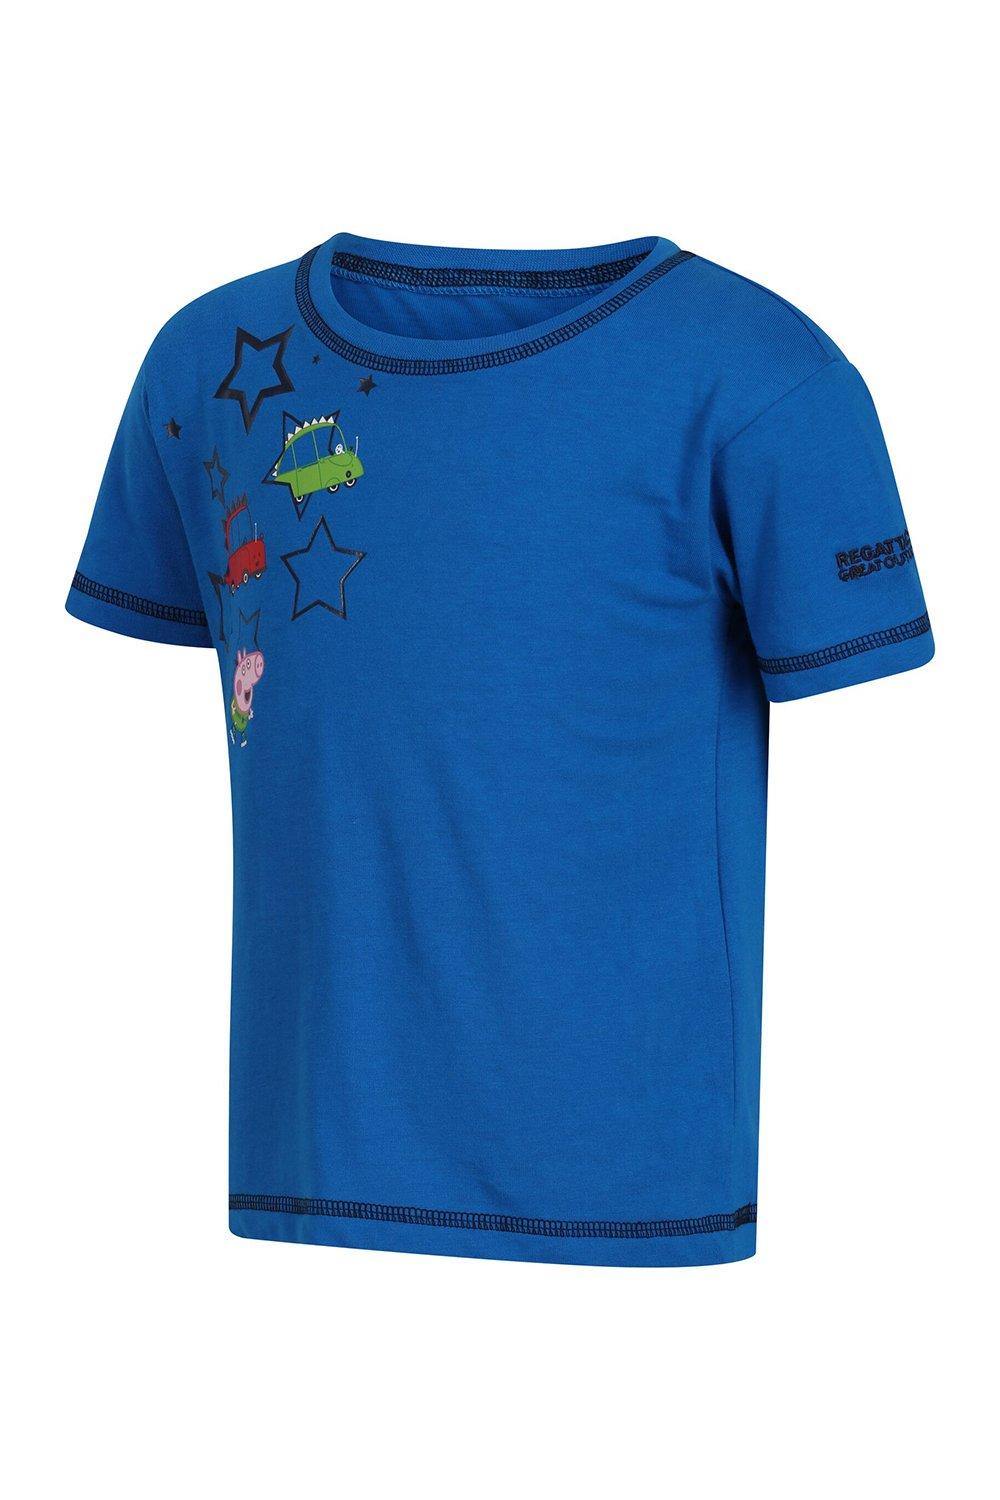 jersey coolweave 'peppa pig' short sleeve t-shirt